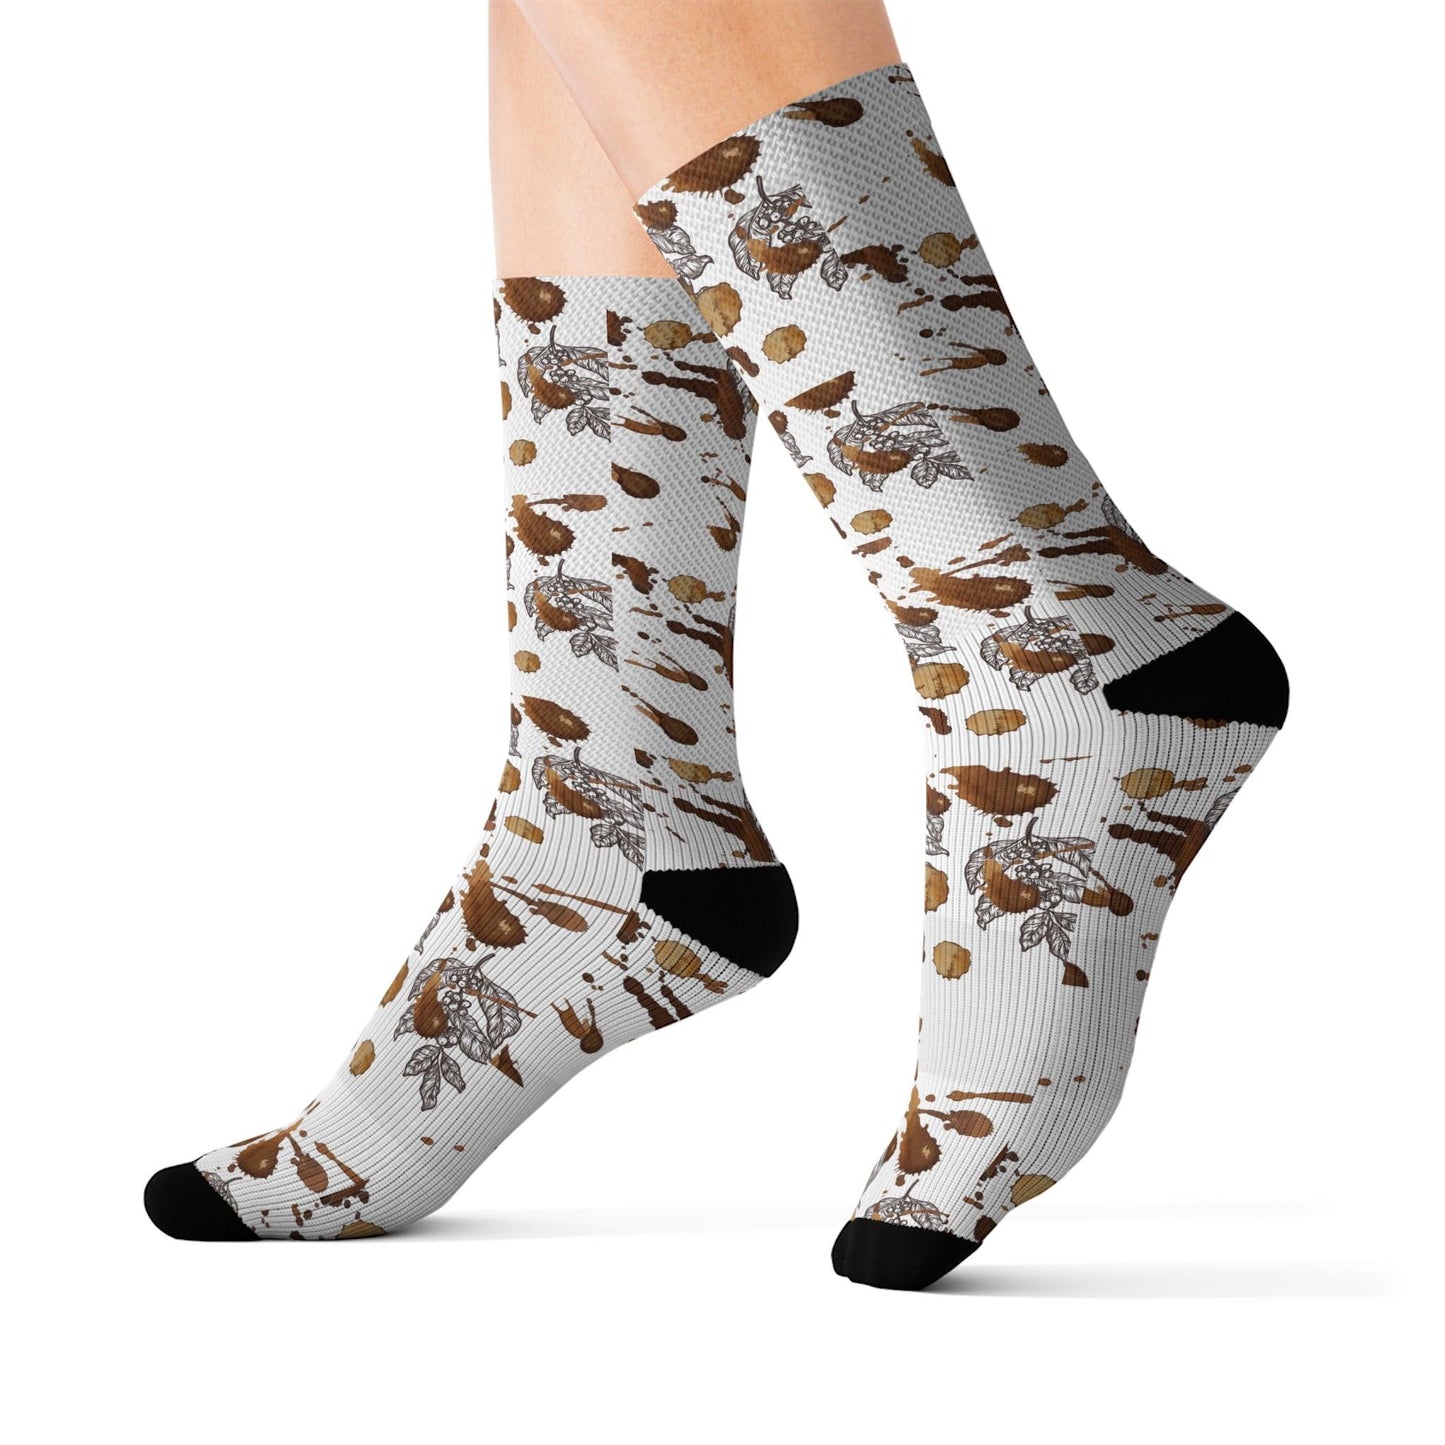 Sticky Coffee Mess and Leaf Socks Gift